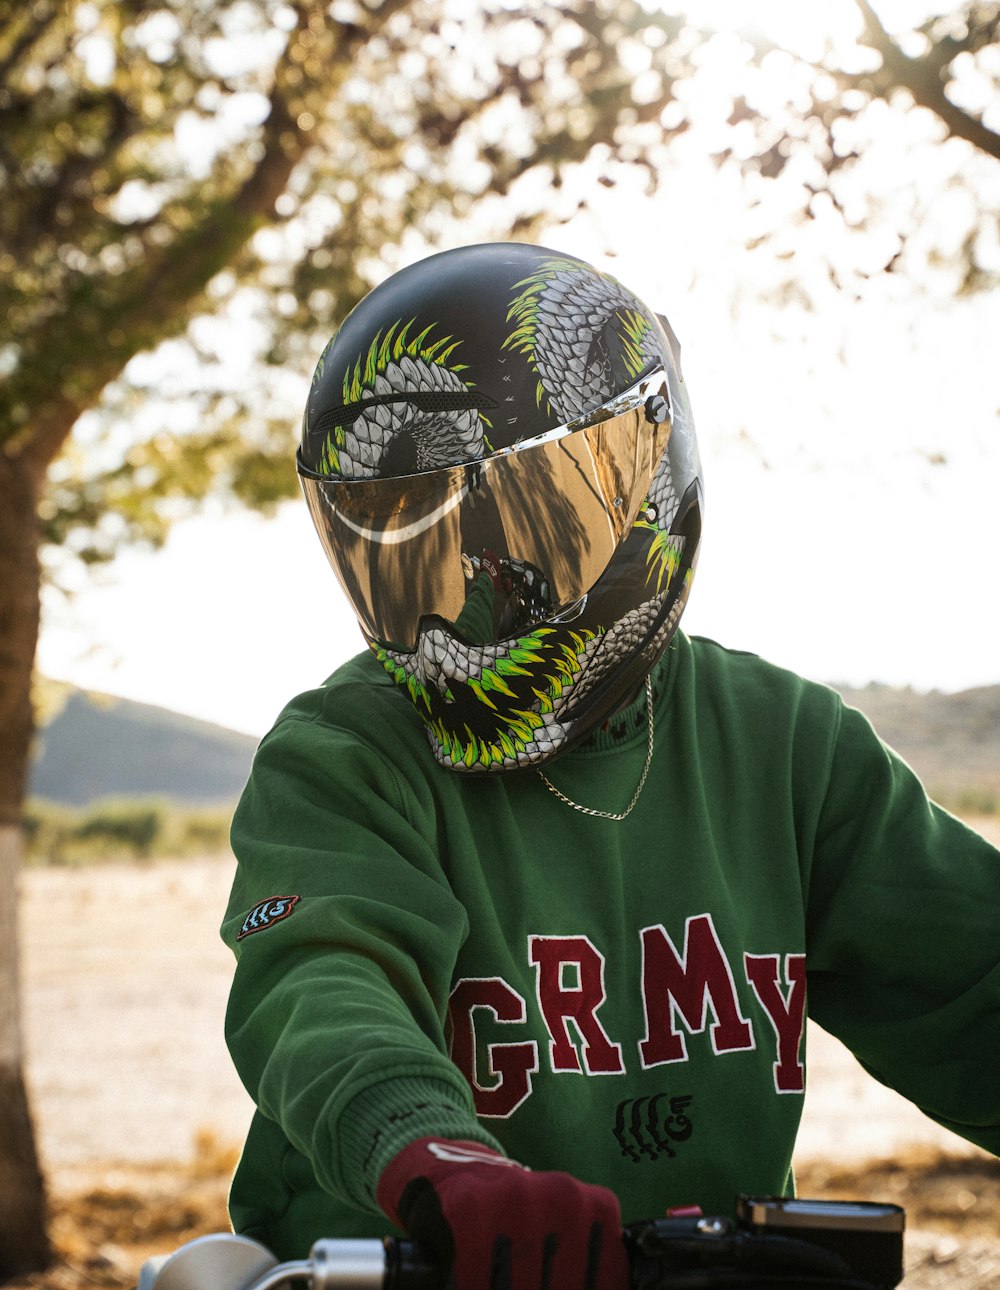 a person in a green shirt wearing a motorcycle helmet